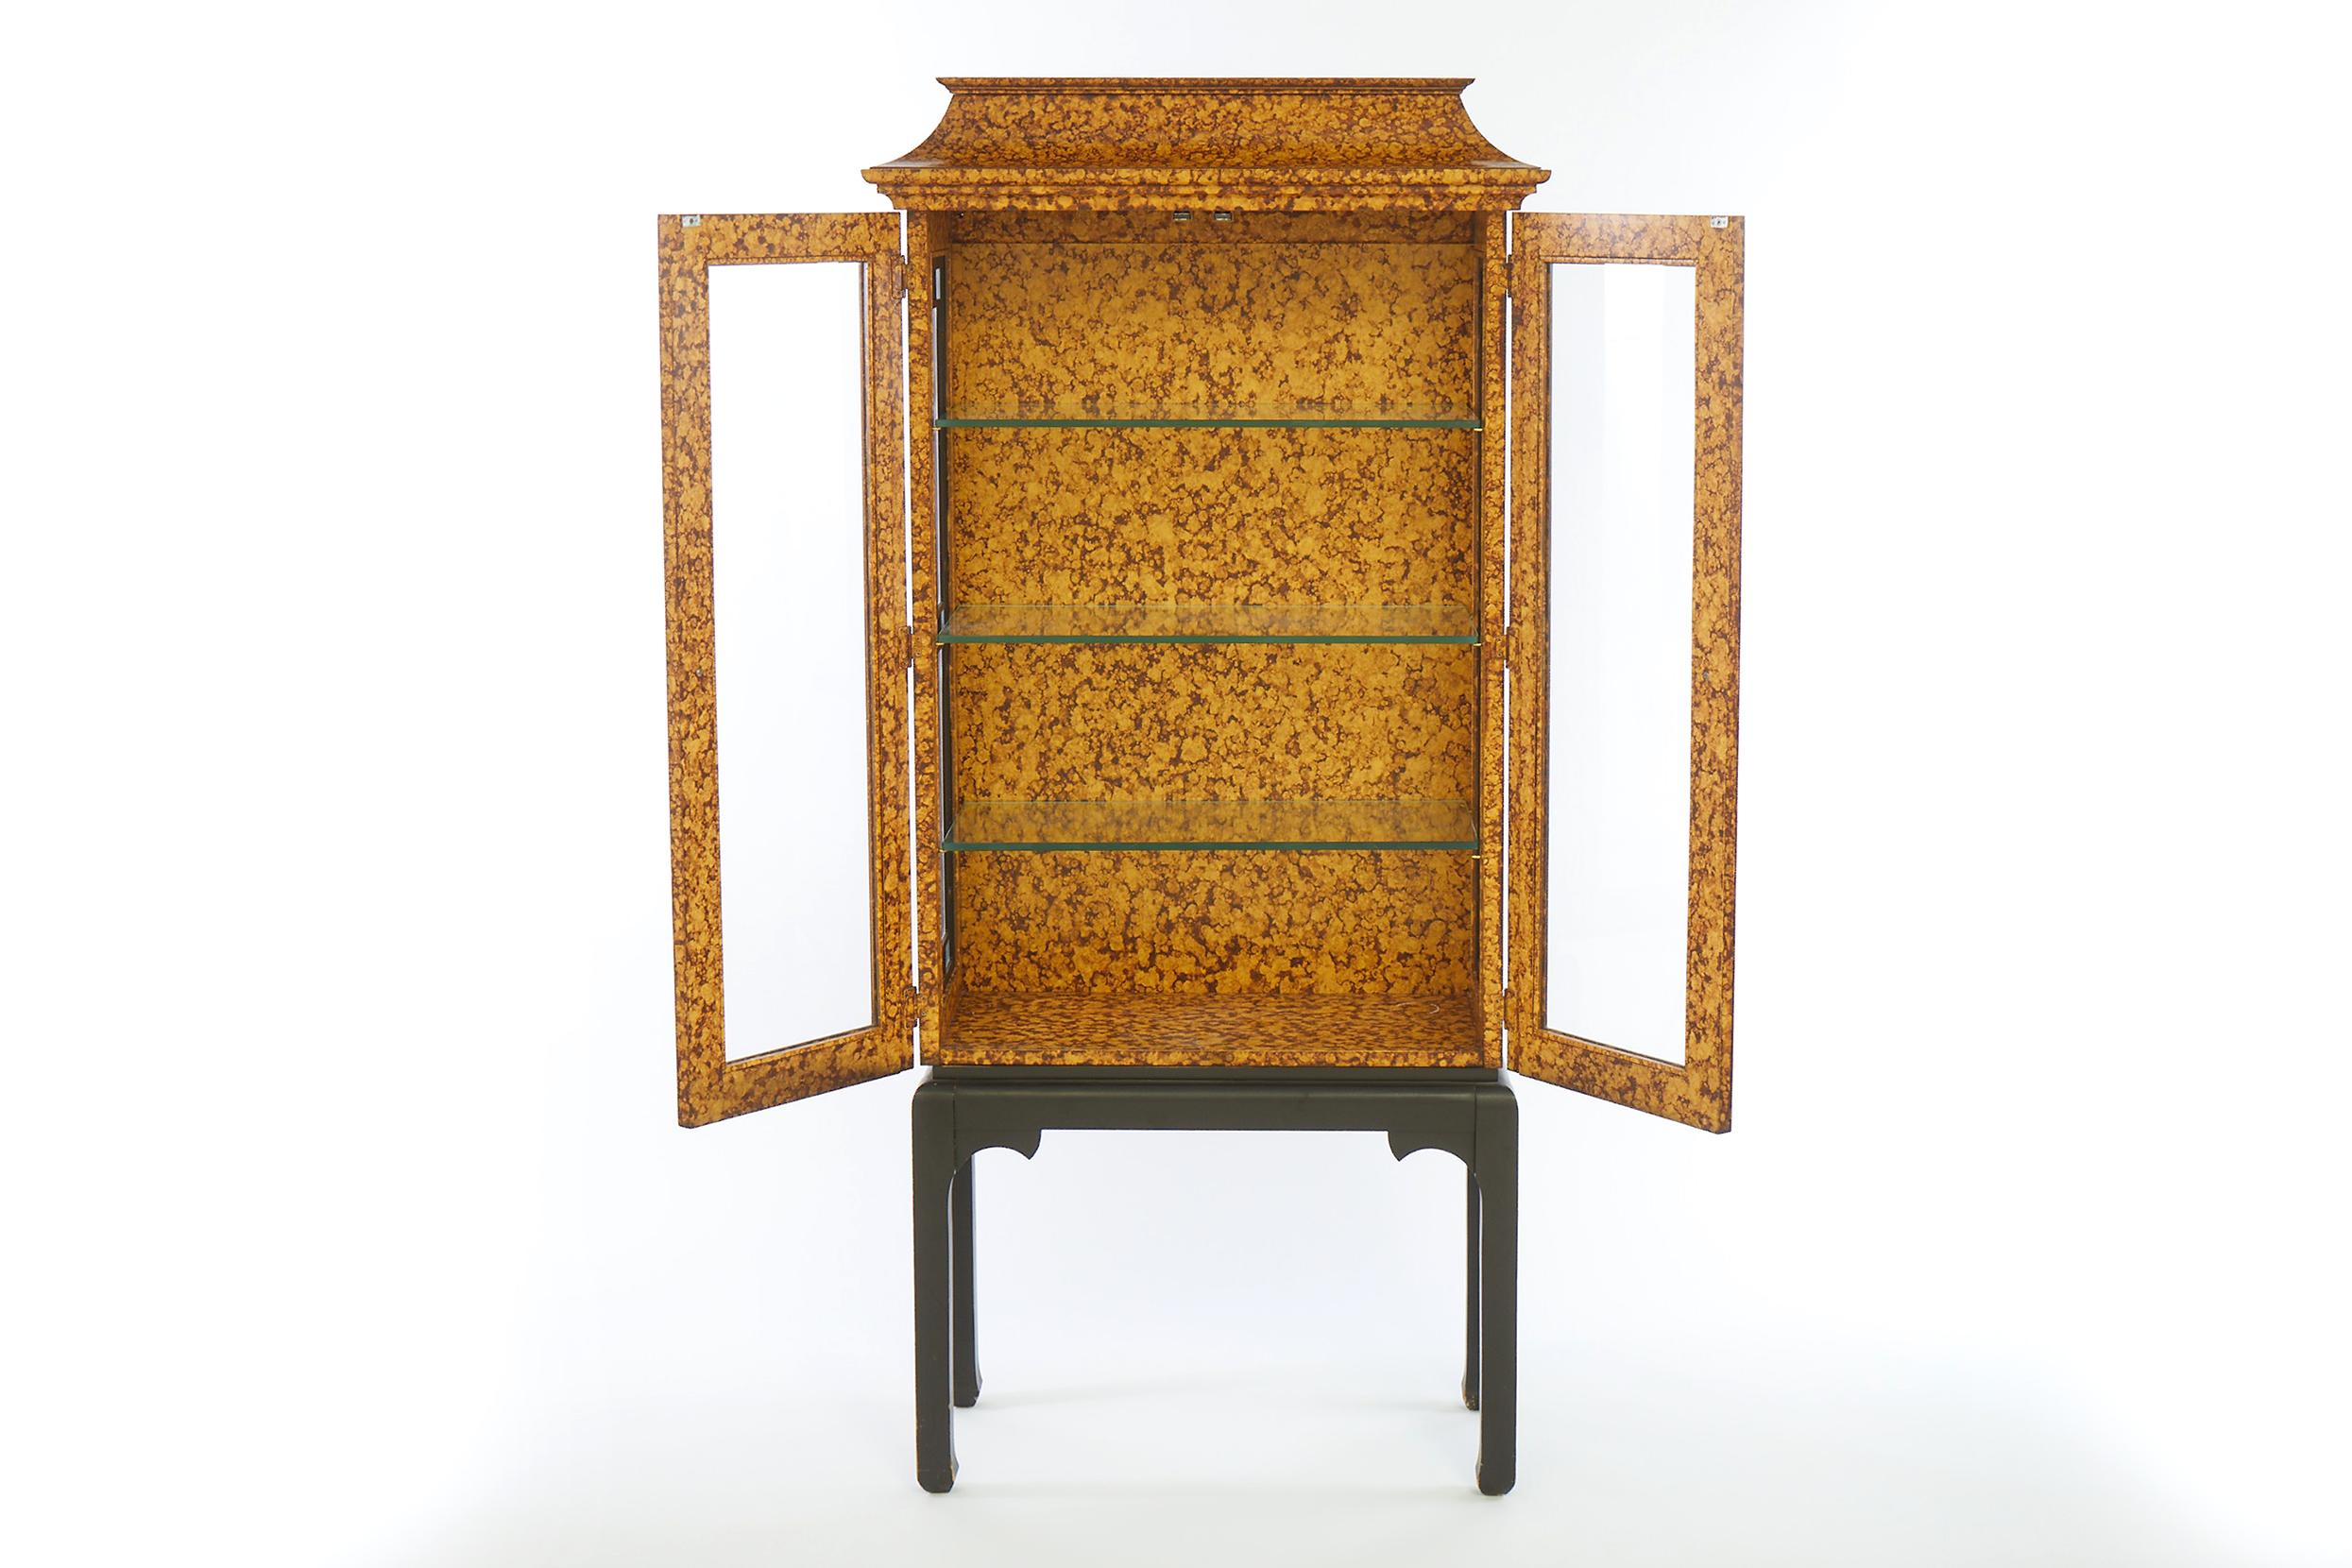 Mid-Century Modern Asian style faux finished display cabinet / vitrine with pagoda style top and ebonized base featuring inside glass shelves with double brass pull door. The cabinet / vitrine is in good condition with appropriate wear consistent